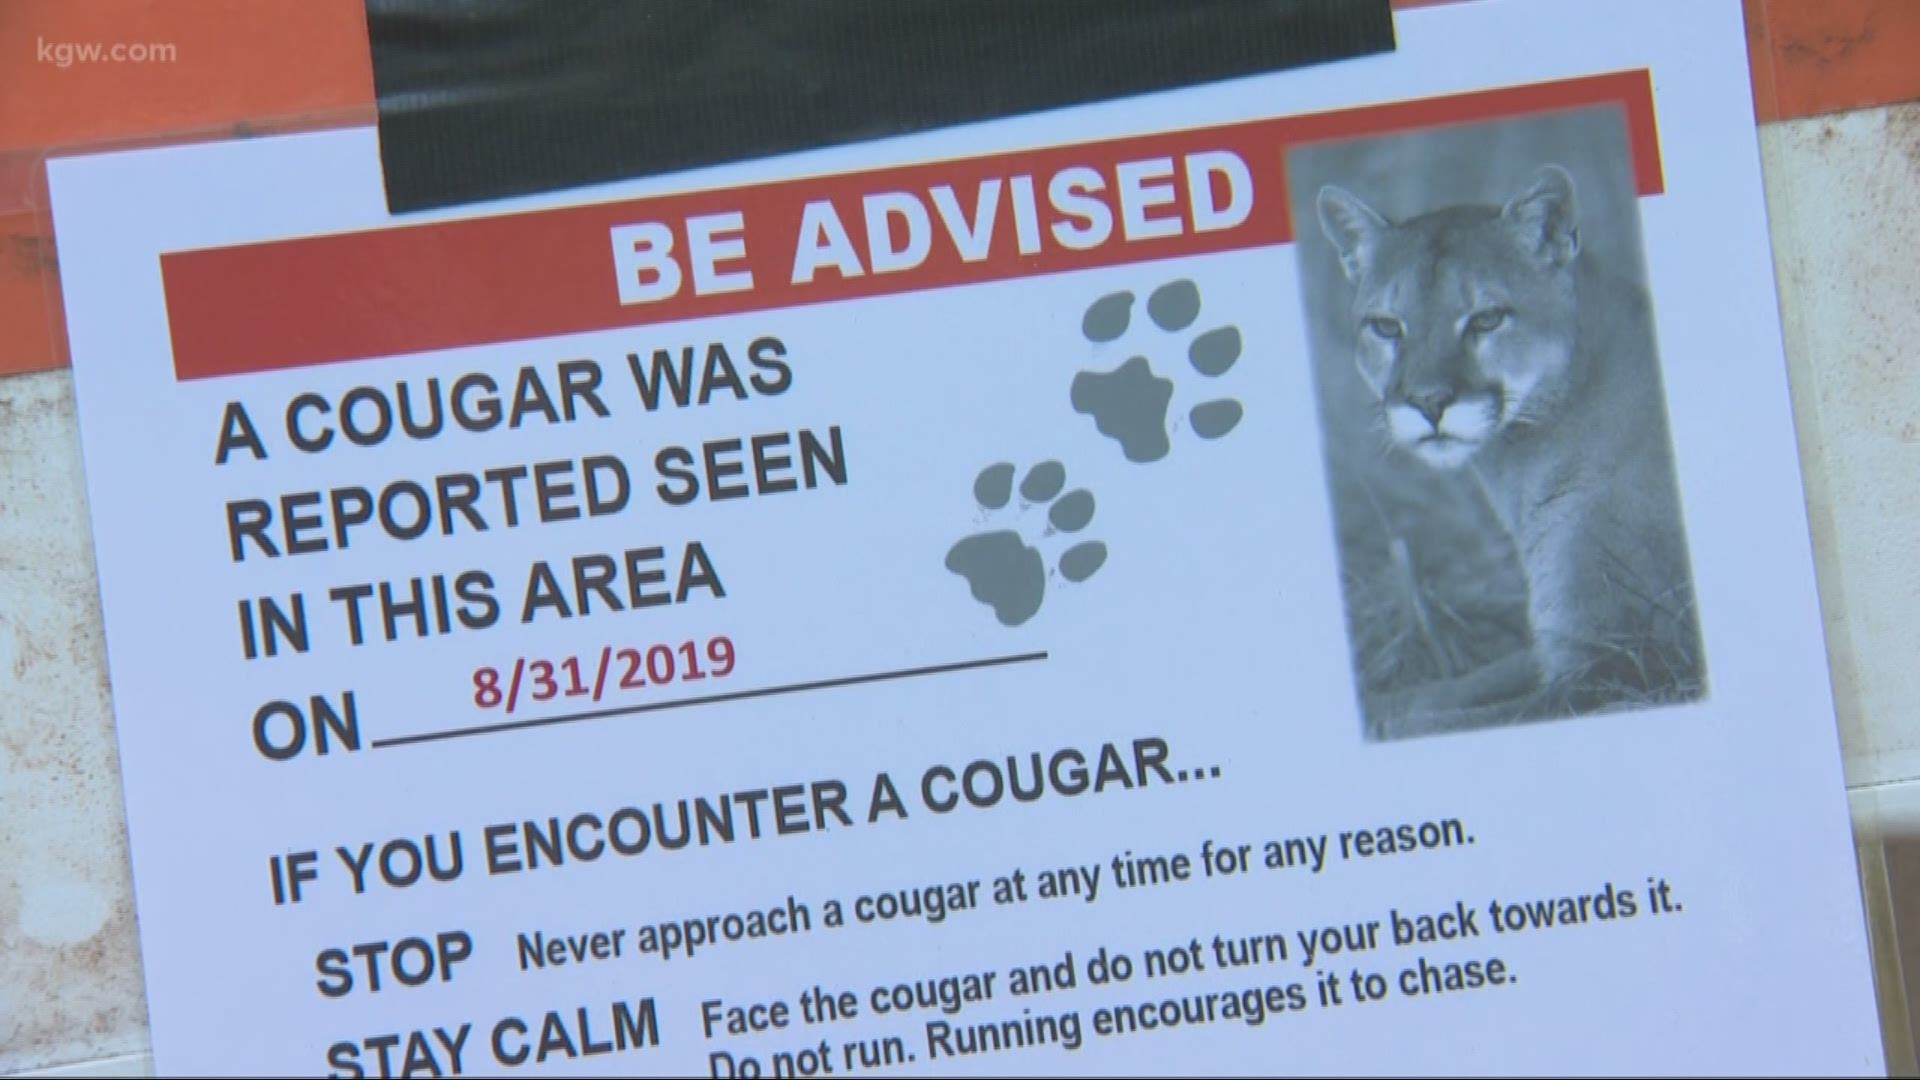 A jogger kicked a cougar in the head during an encounter near Corvallis. Then the cougar chased him before it was scared away.